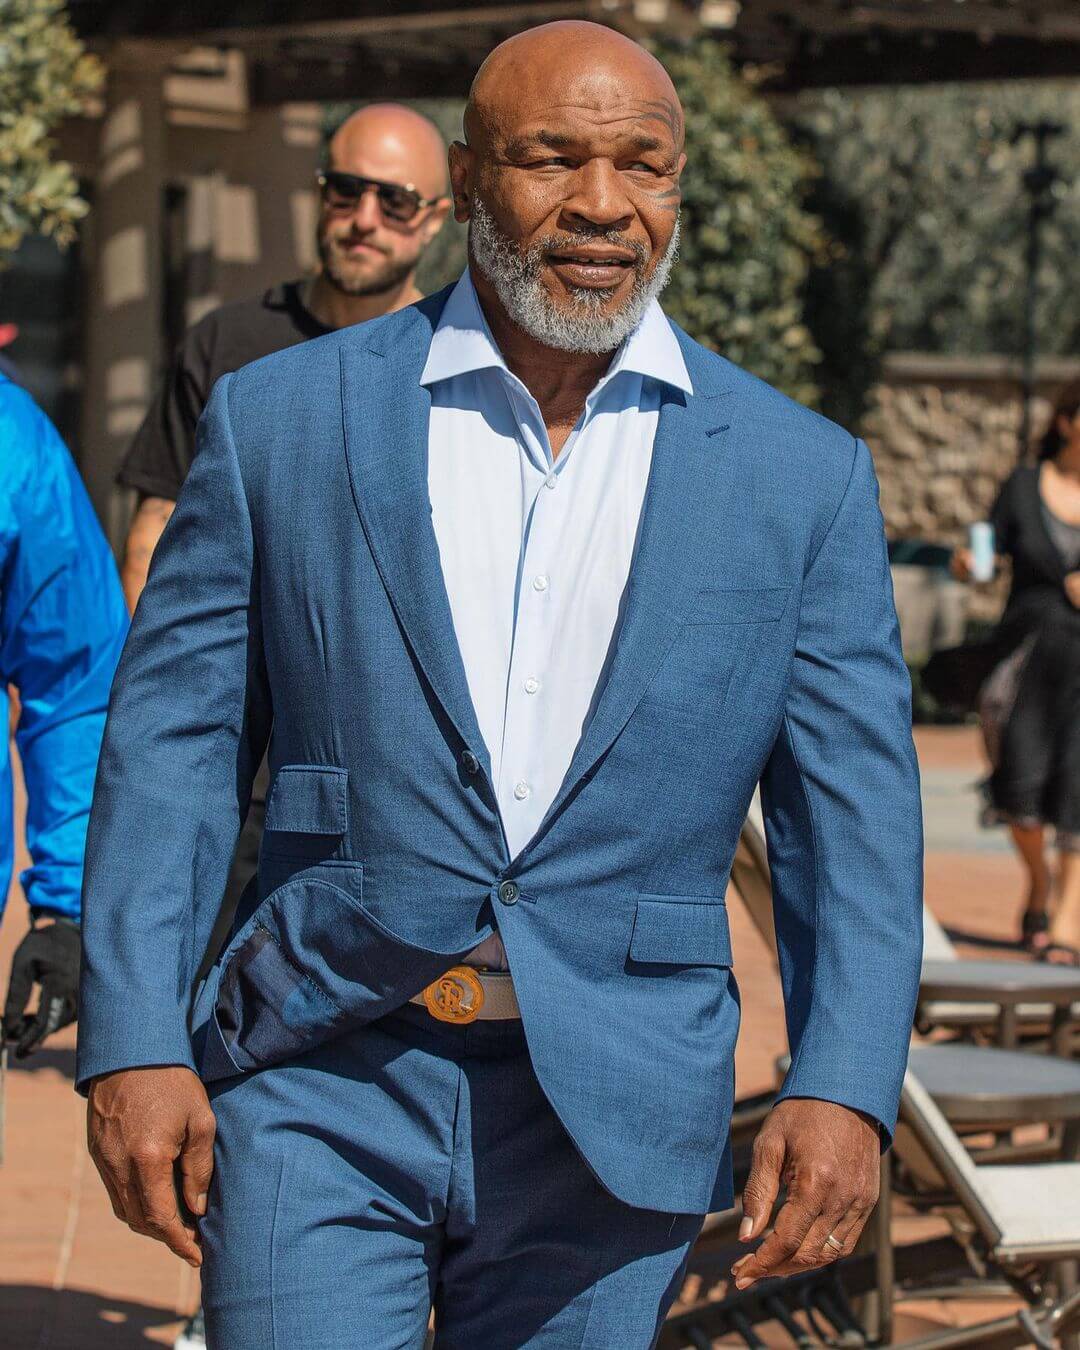 Mike Tyson stylish look in suit